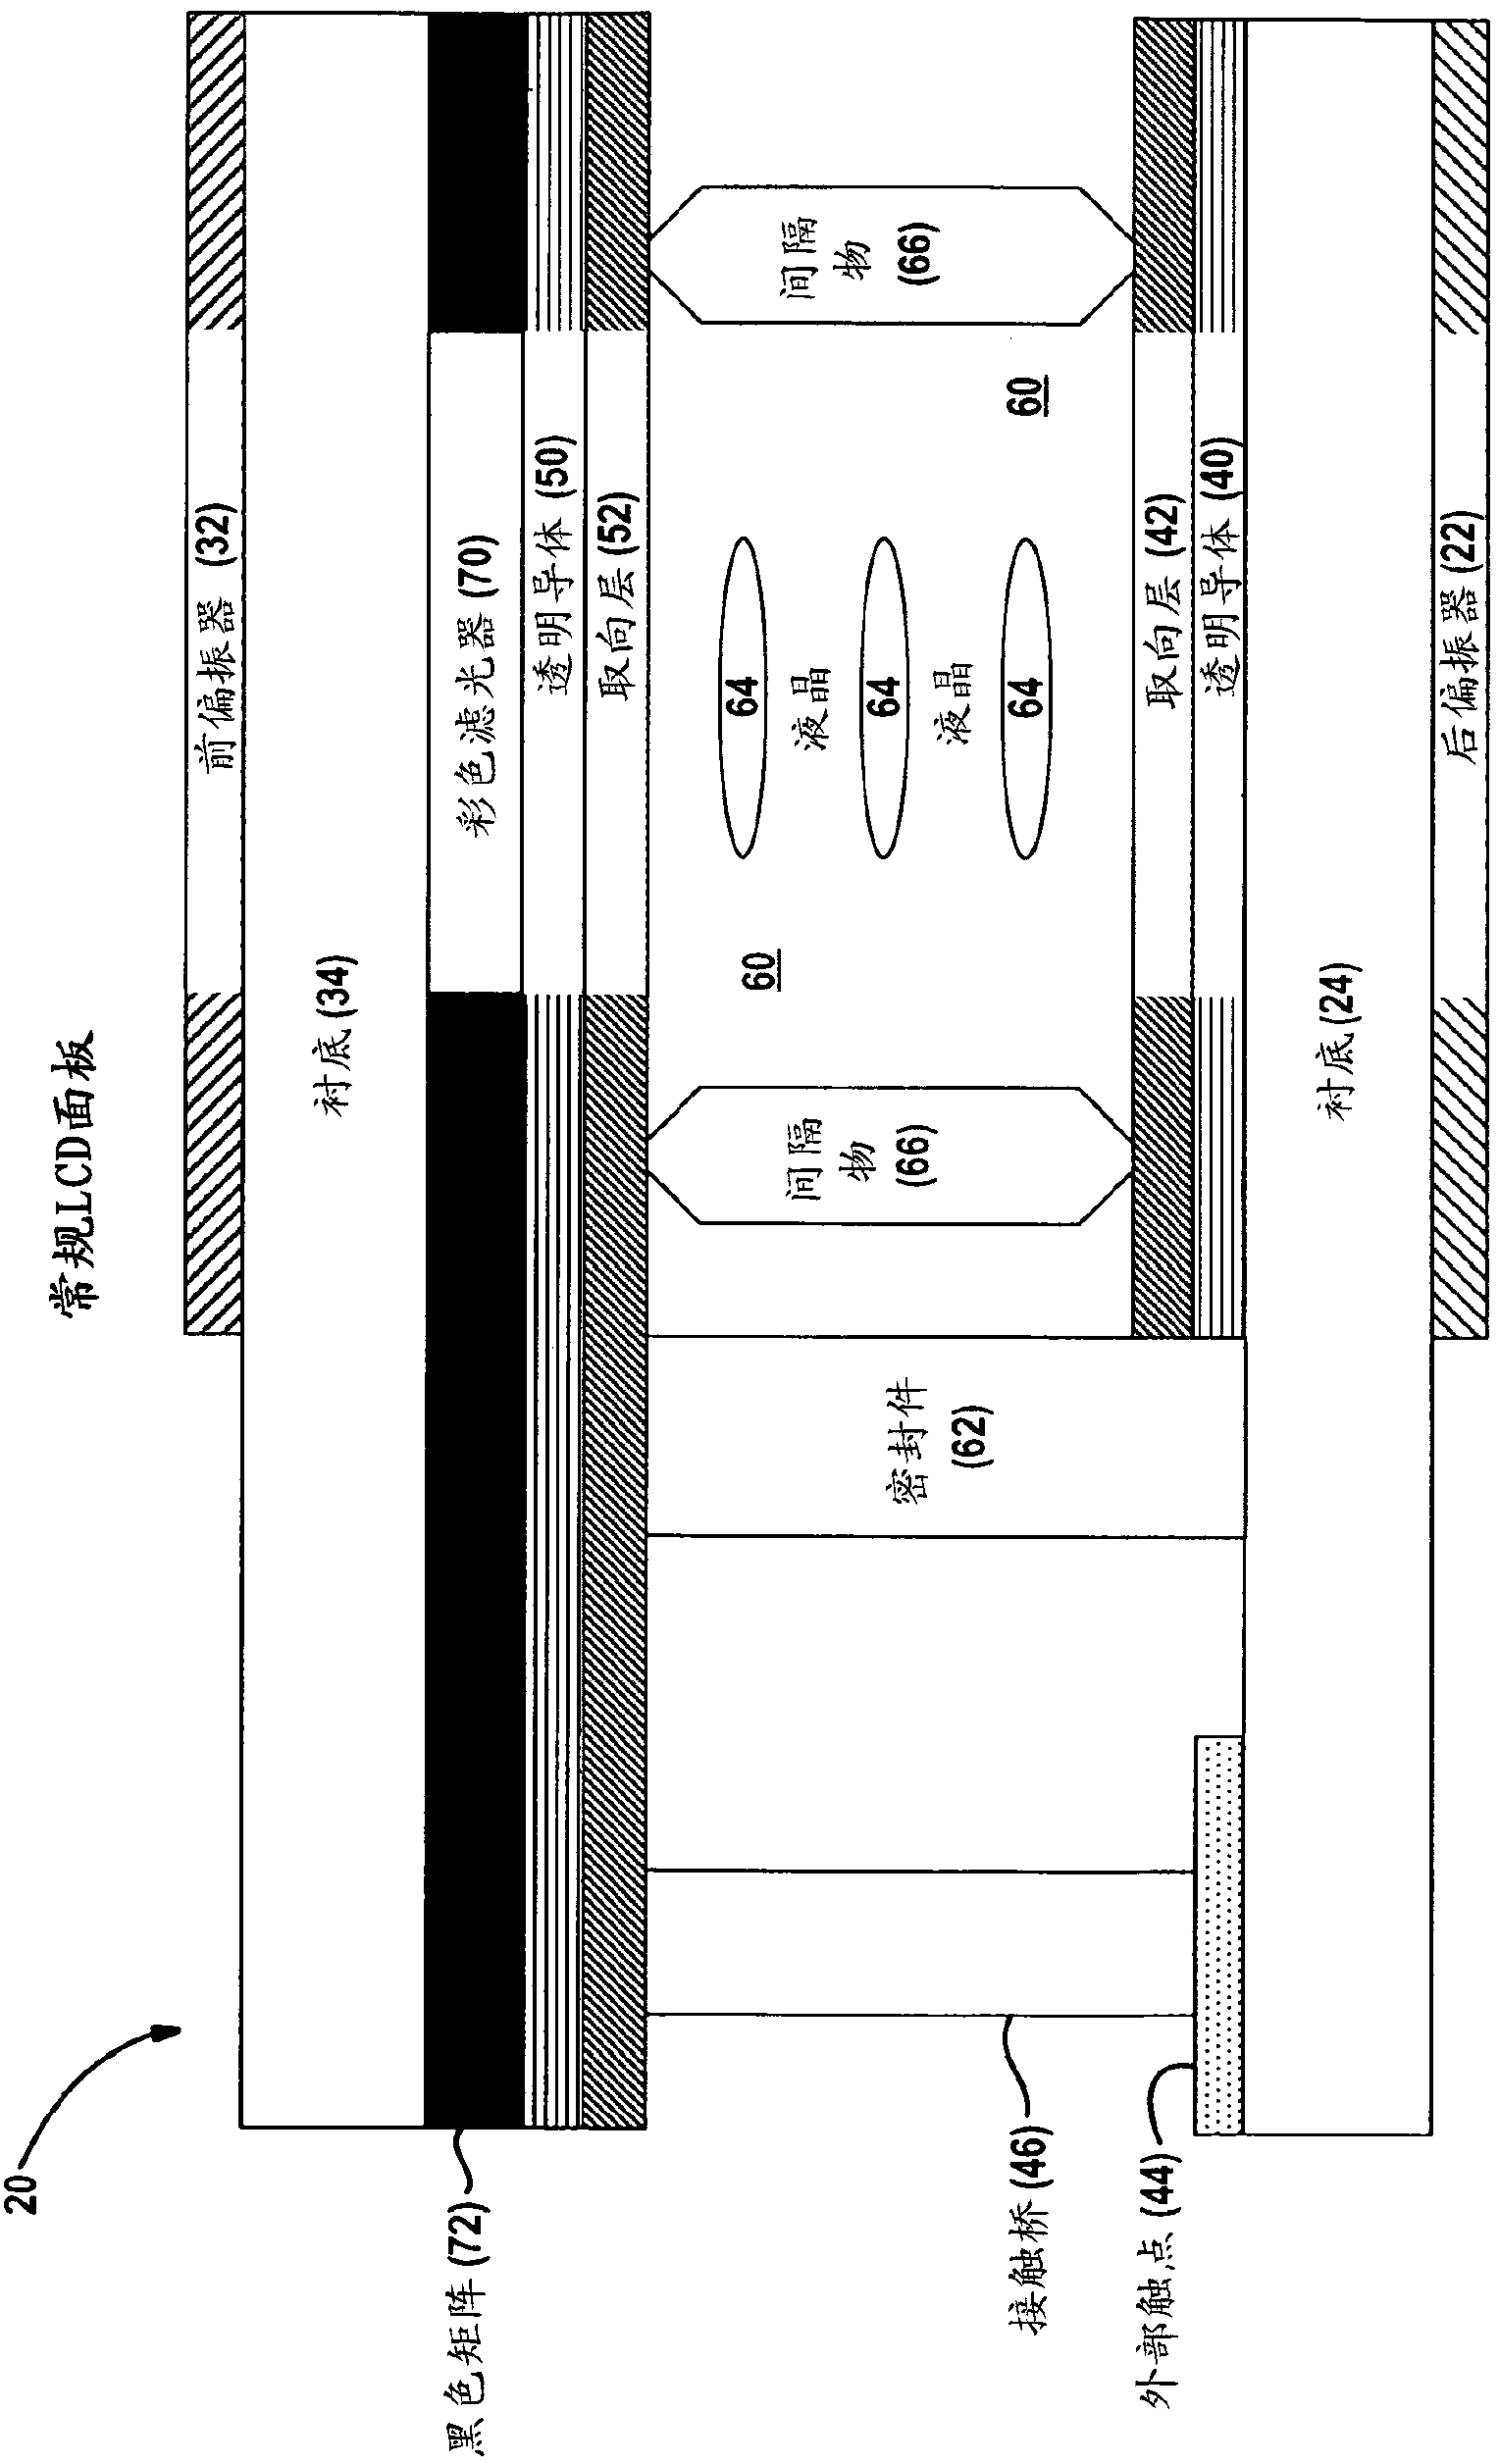 Display device having plasmonic color filters and photovoltaic capabilities